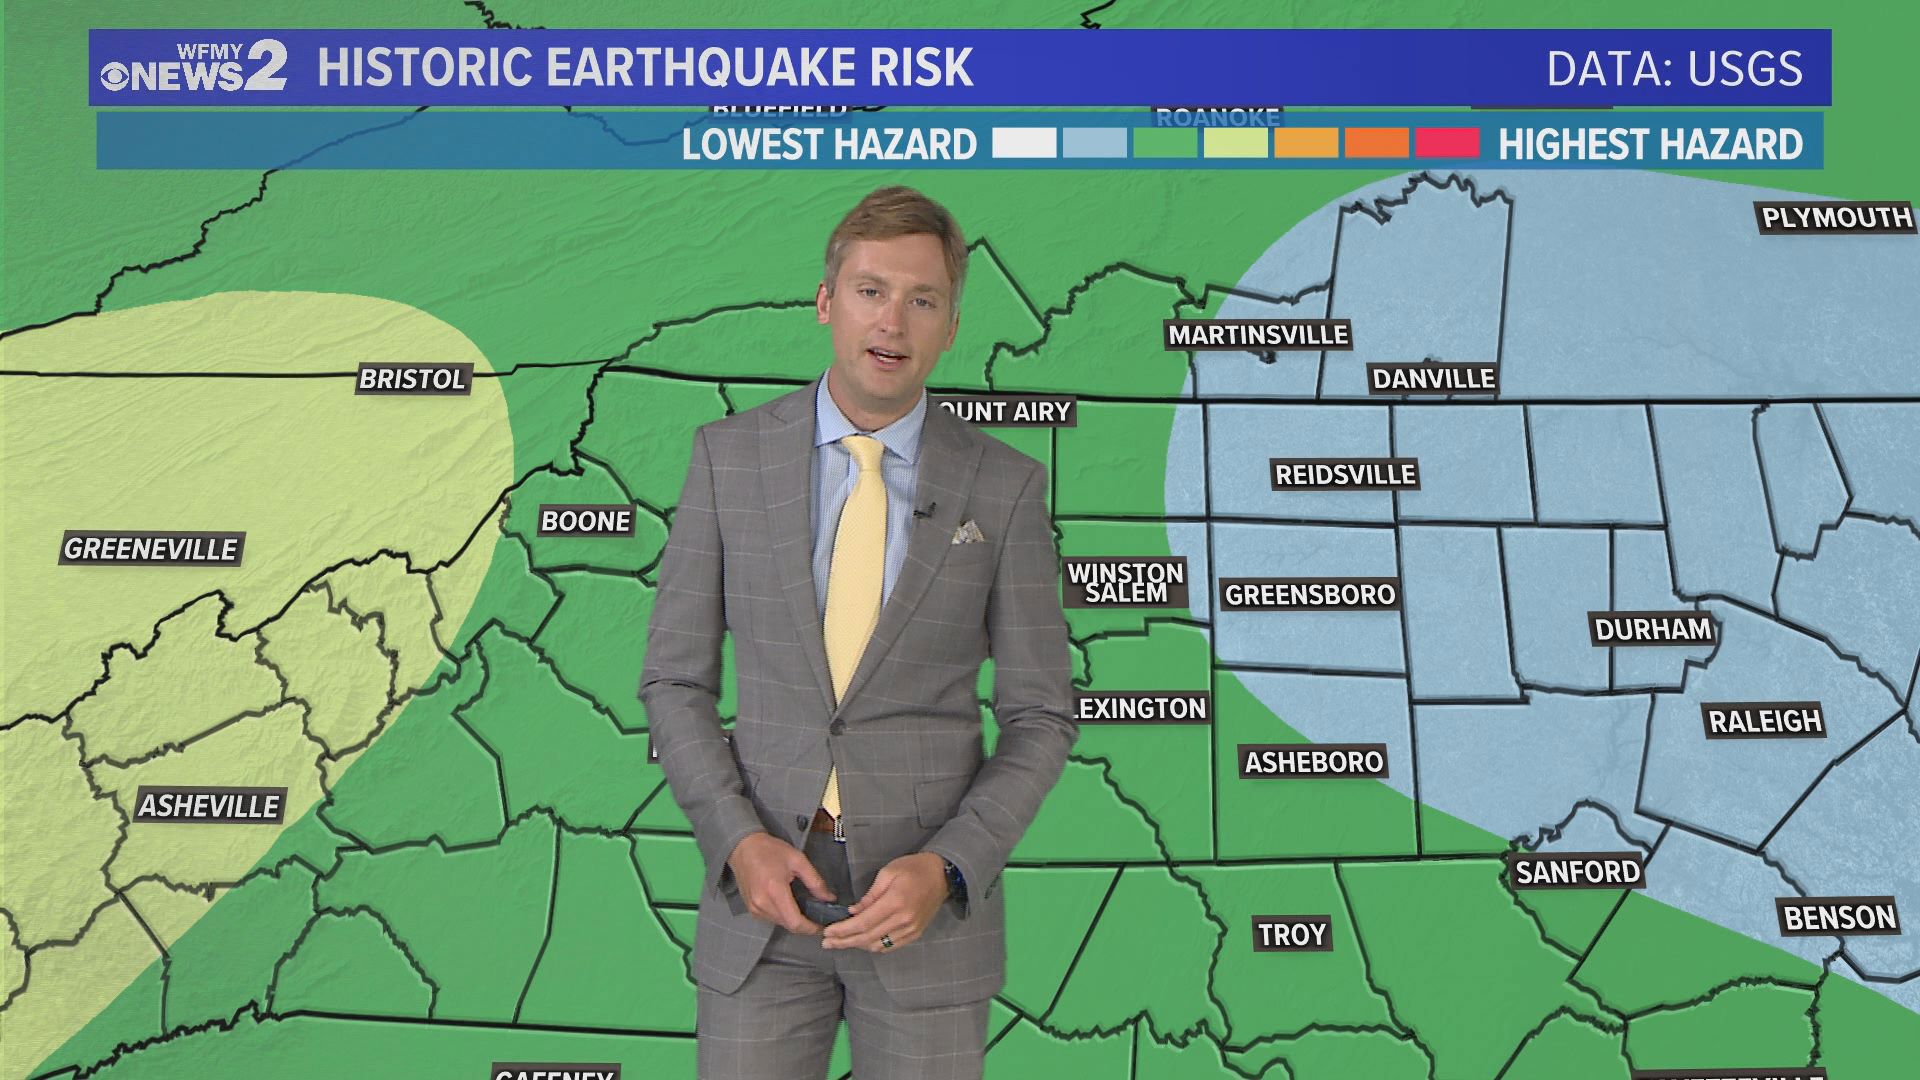 Is the earthquake risk higher in North Carolina?